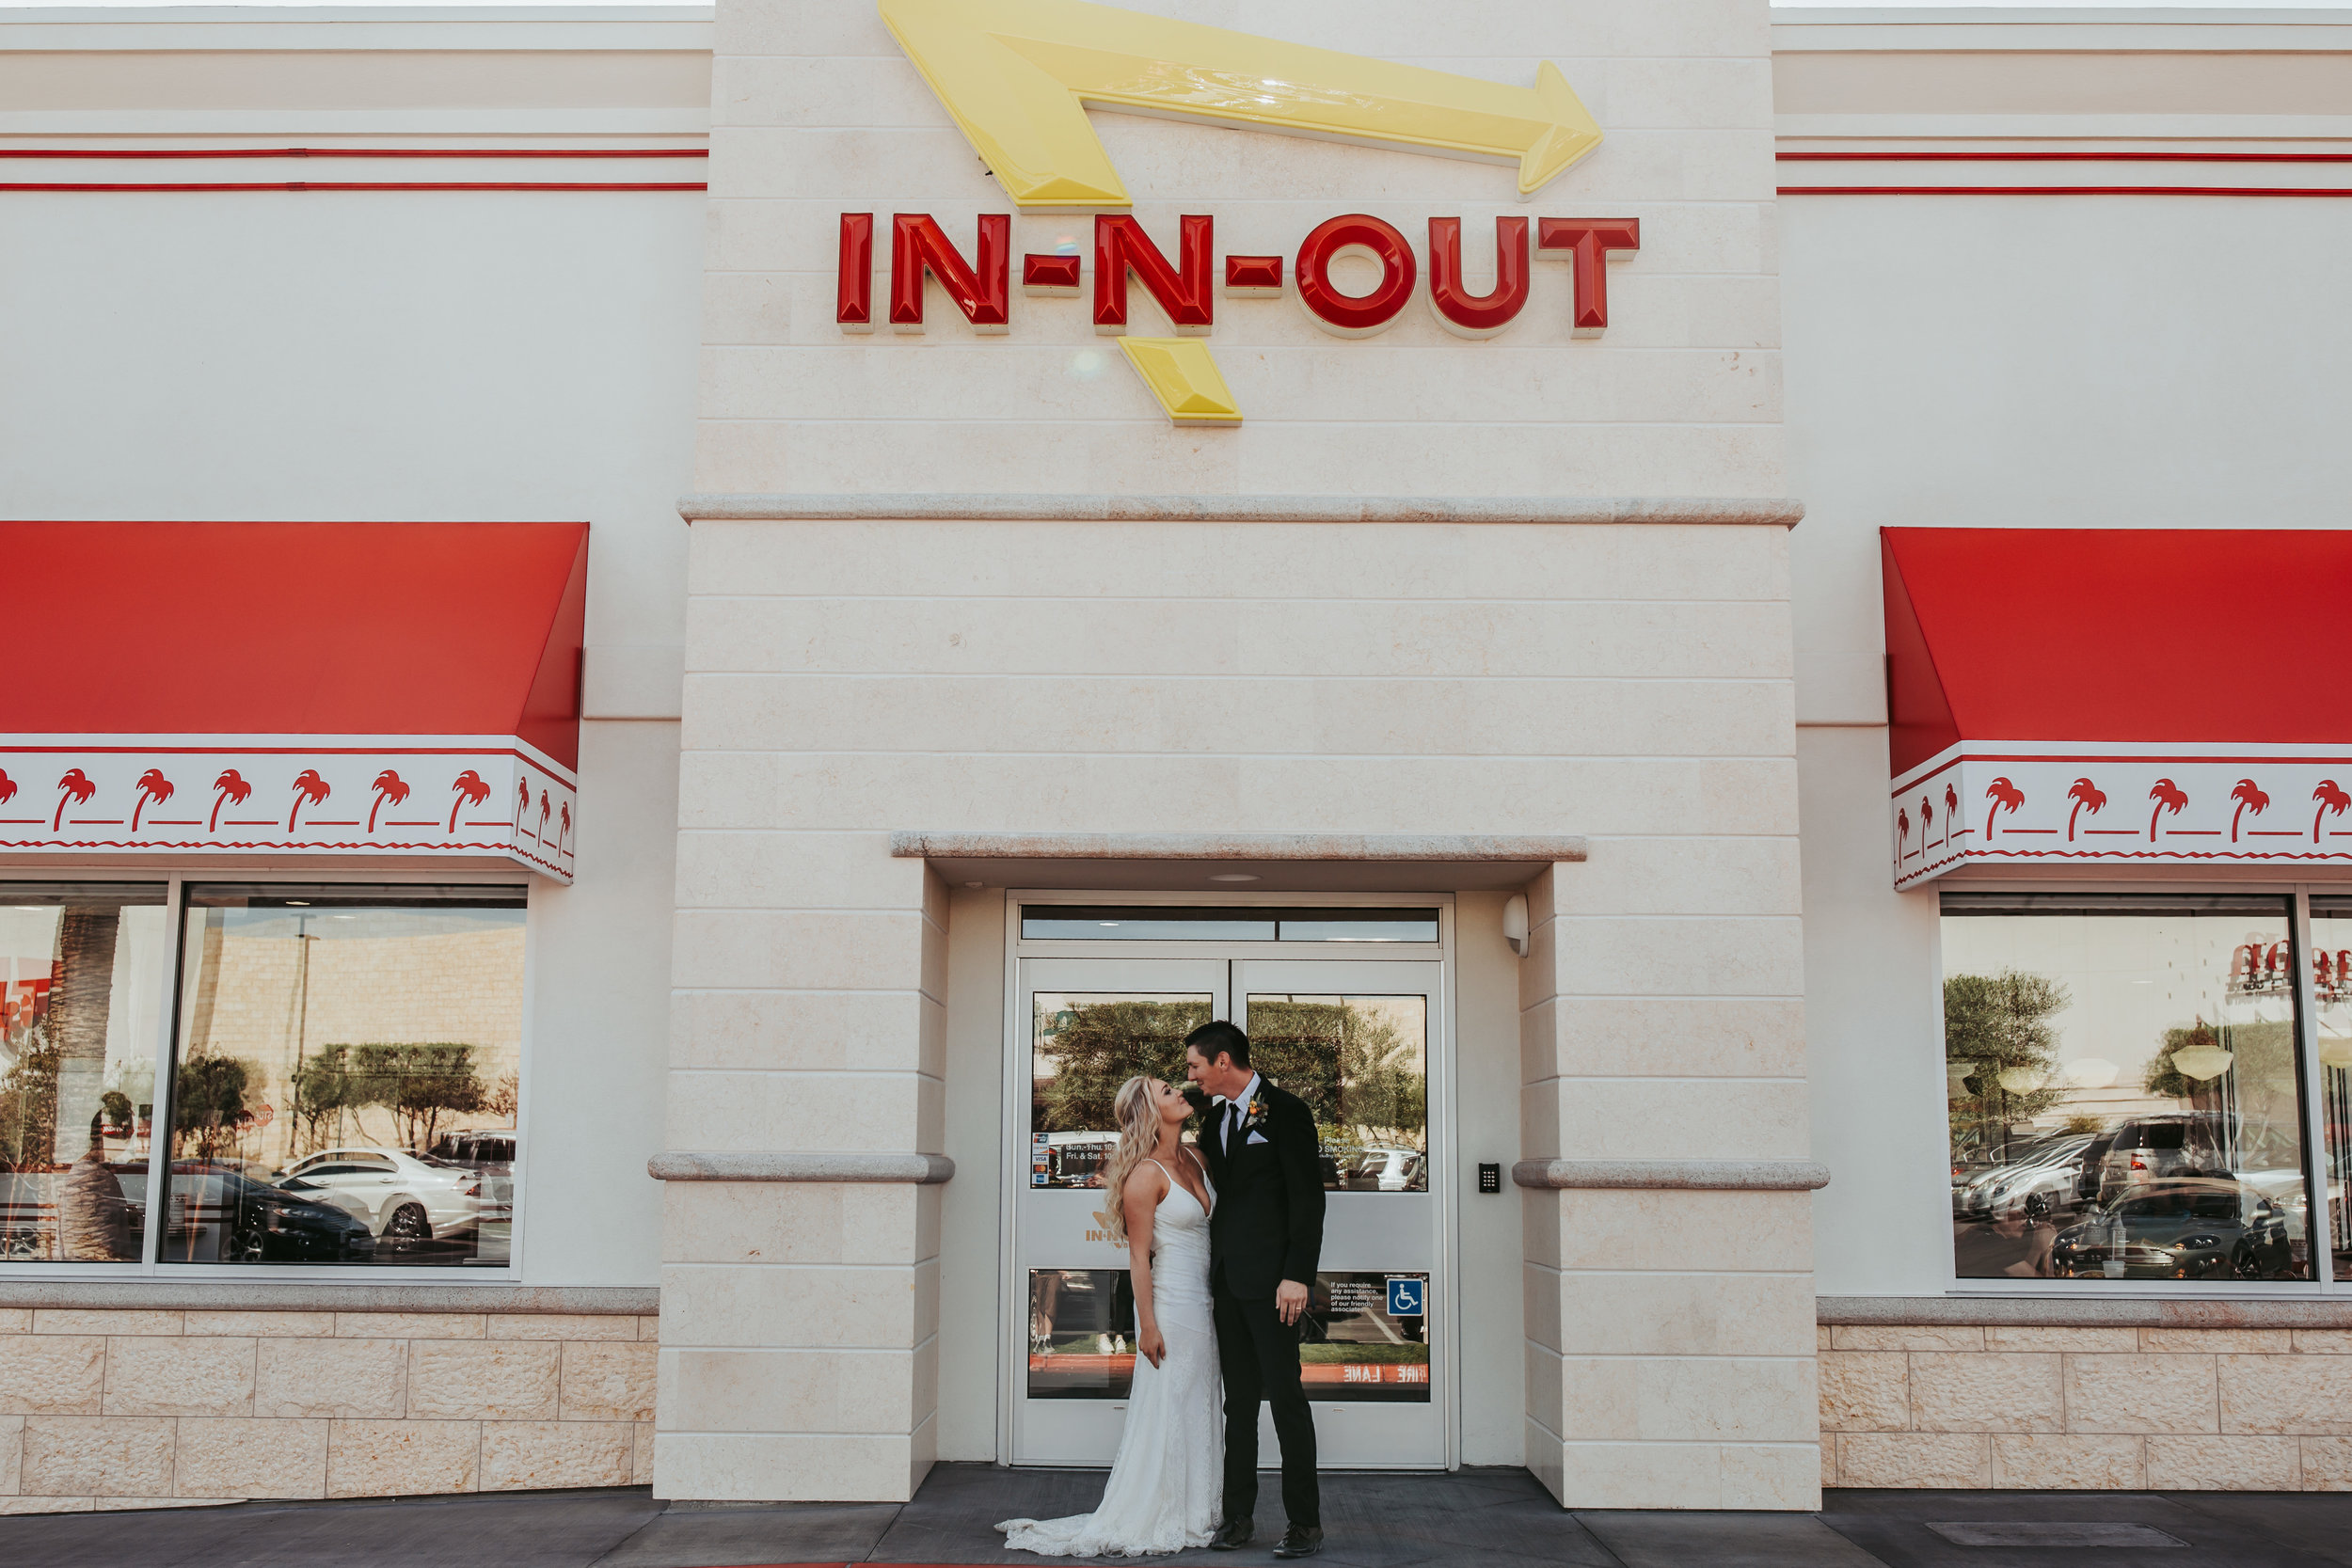 Rustic Bloom Photography | Fun Elopement Inspiration | In-N-Out Burger